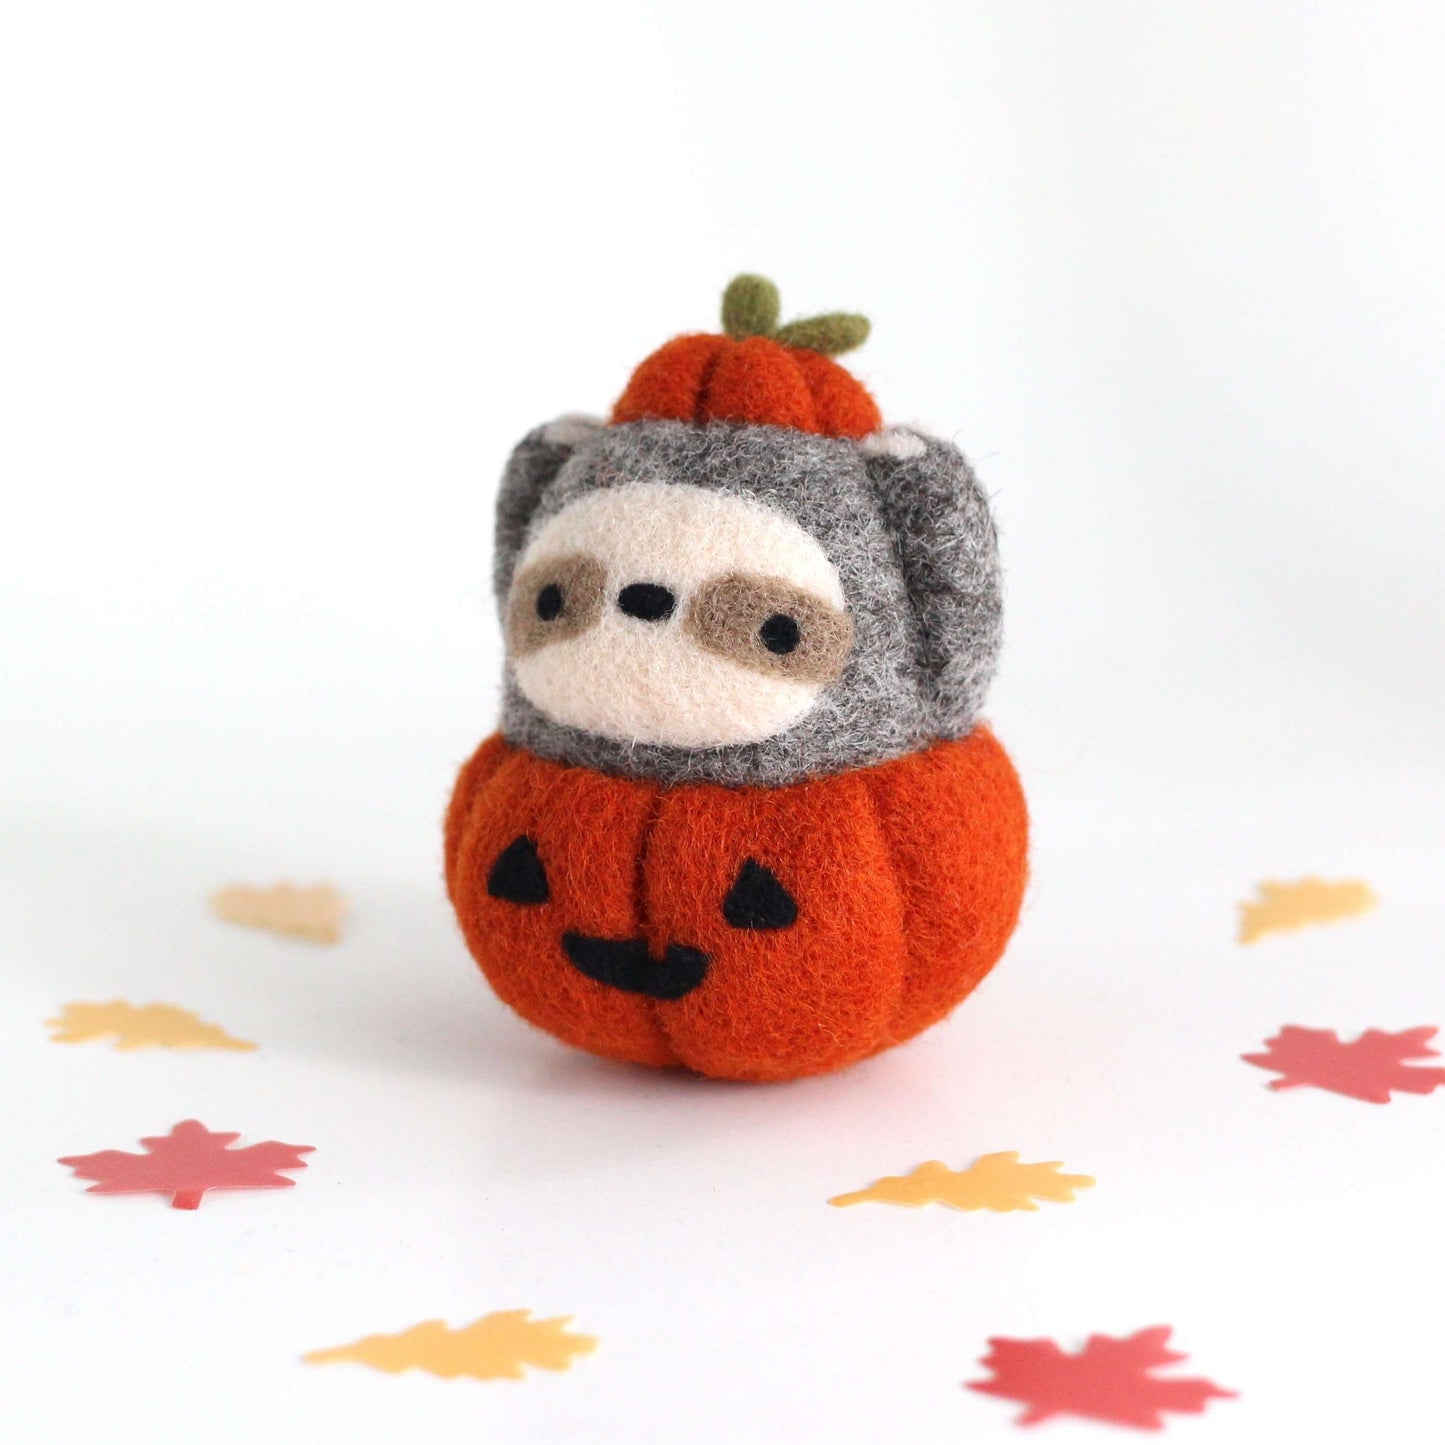 Needle Felted Sloth in Jack-o'-Lantern (Burnt Orange Variant) by Wild Whimsy Woolies